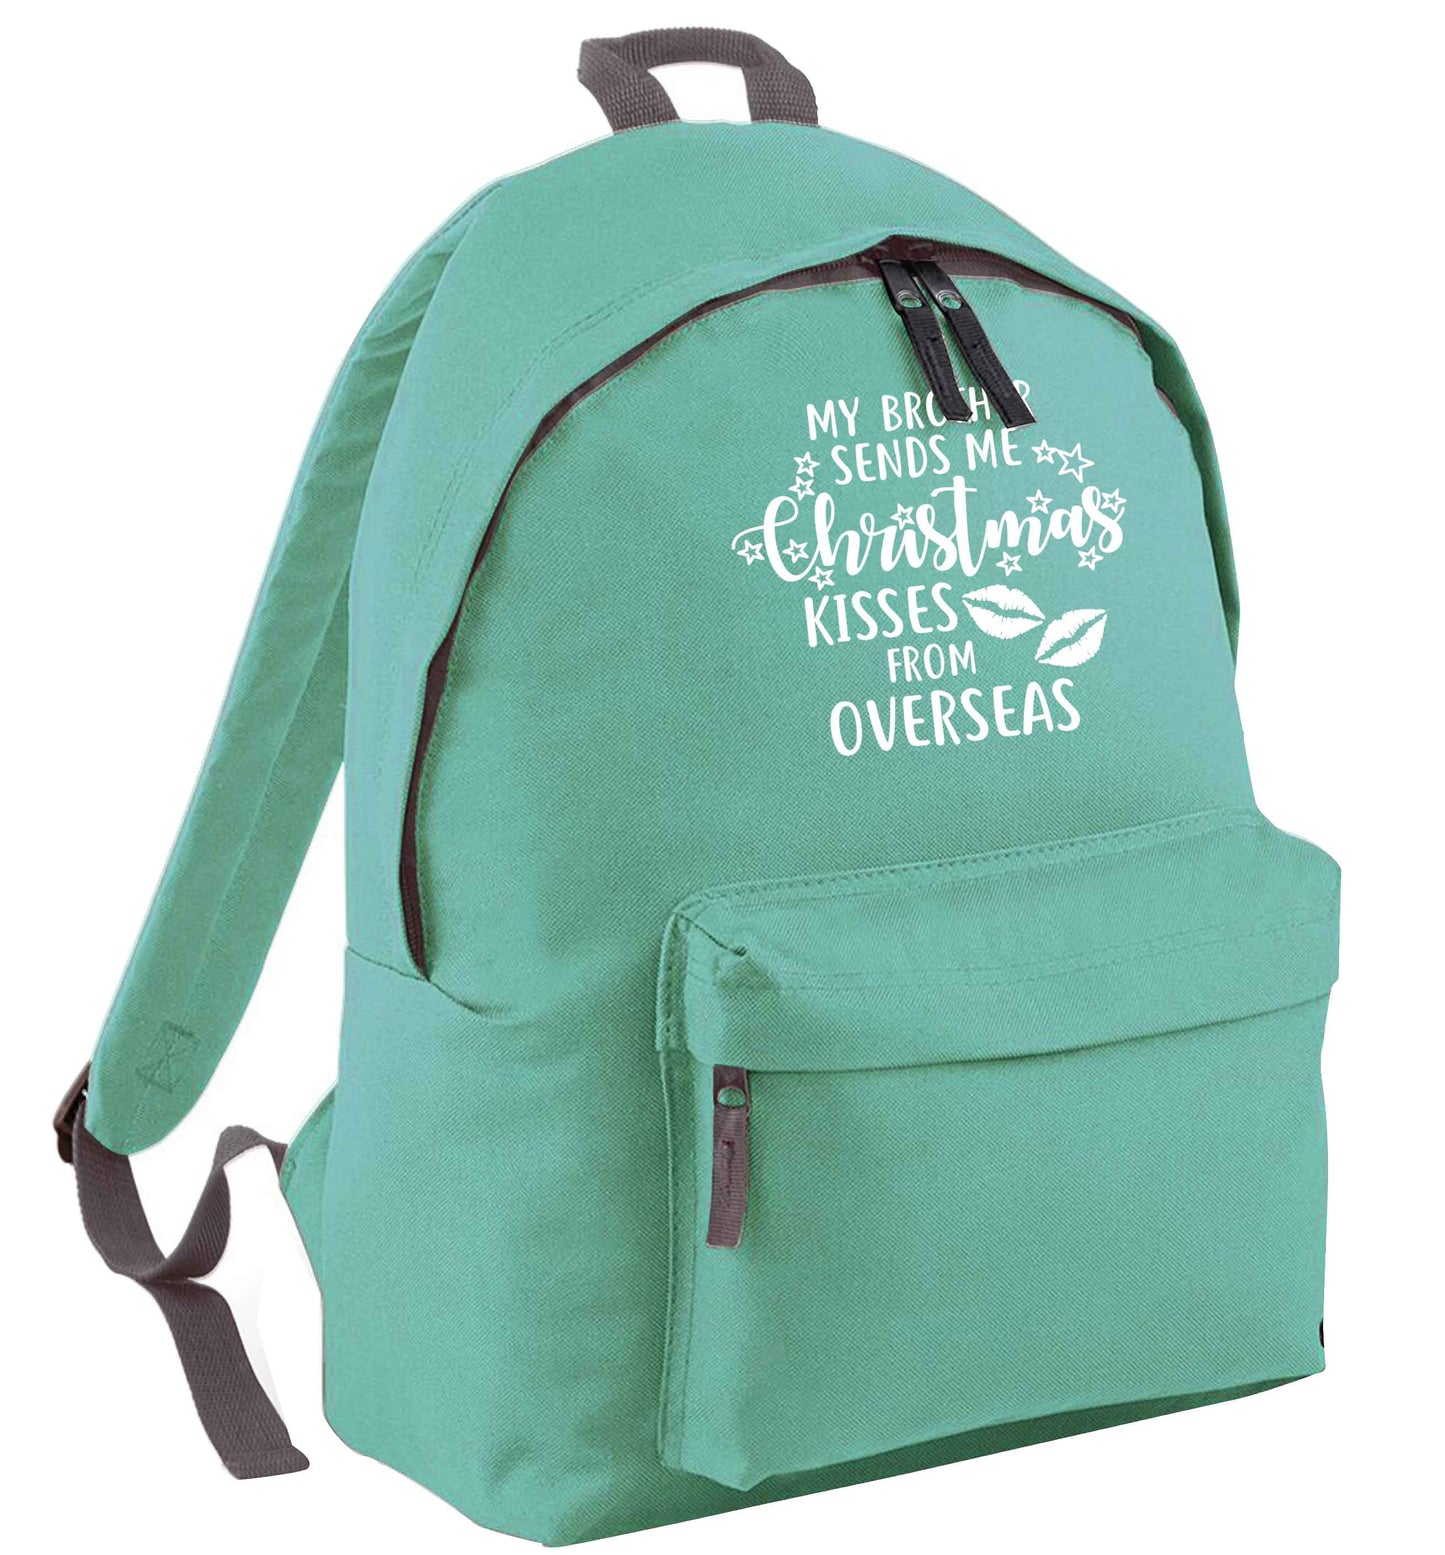 Brother Christmas Kisses Overseas mint adults backpack